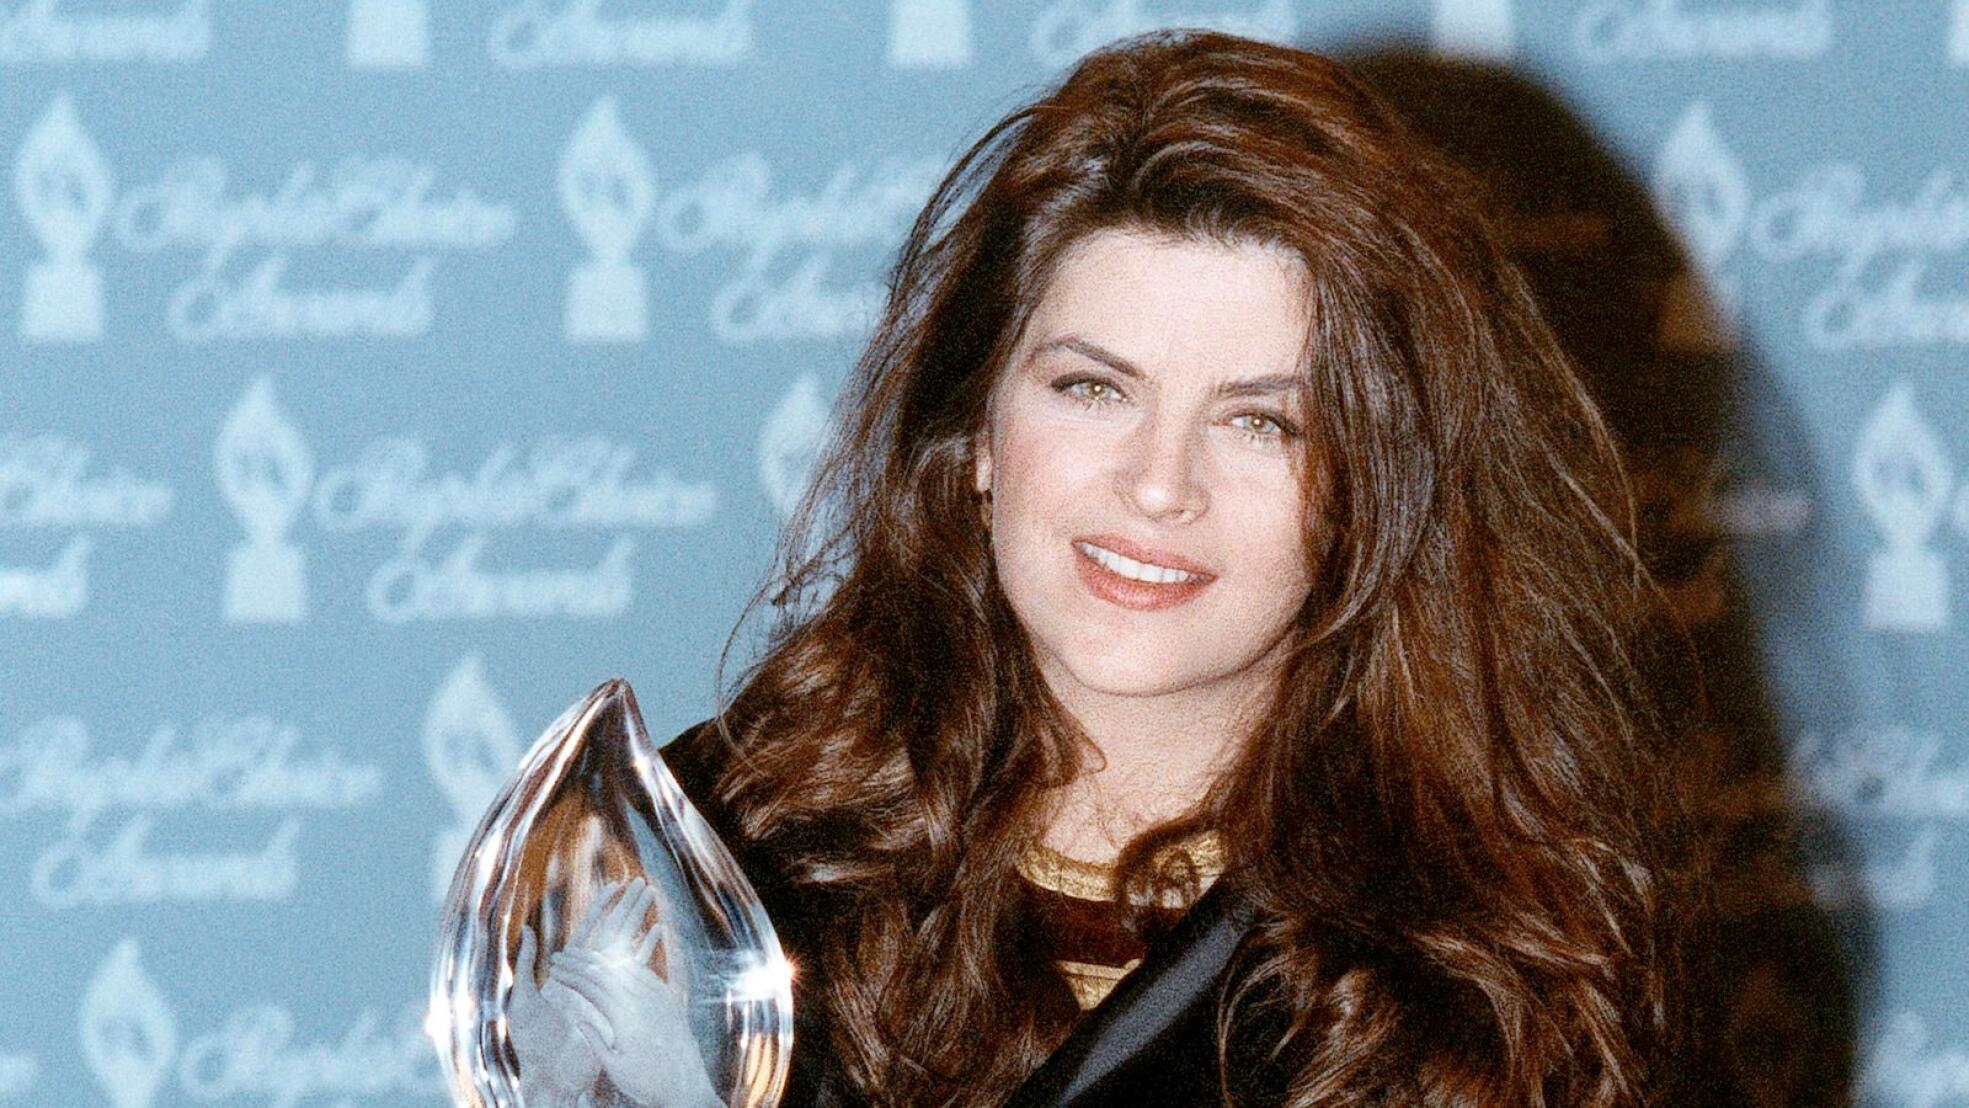 Actress Kirstie Alley dies at 71 of cancer that was ‘only recently discovered’